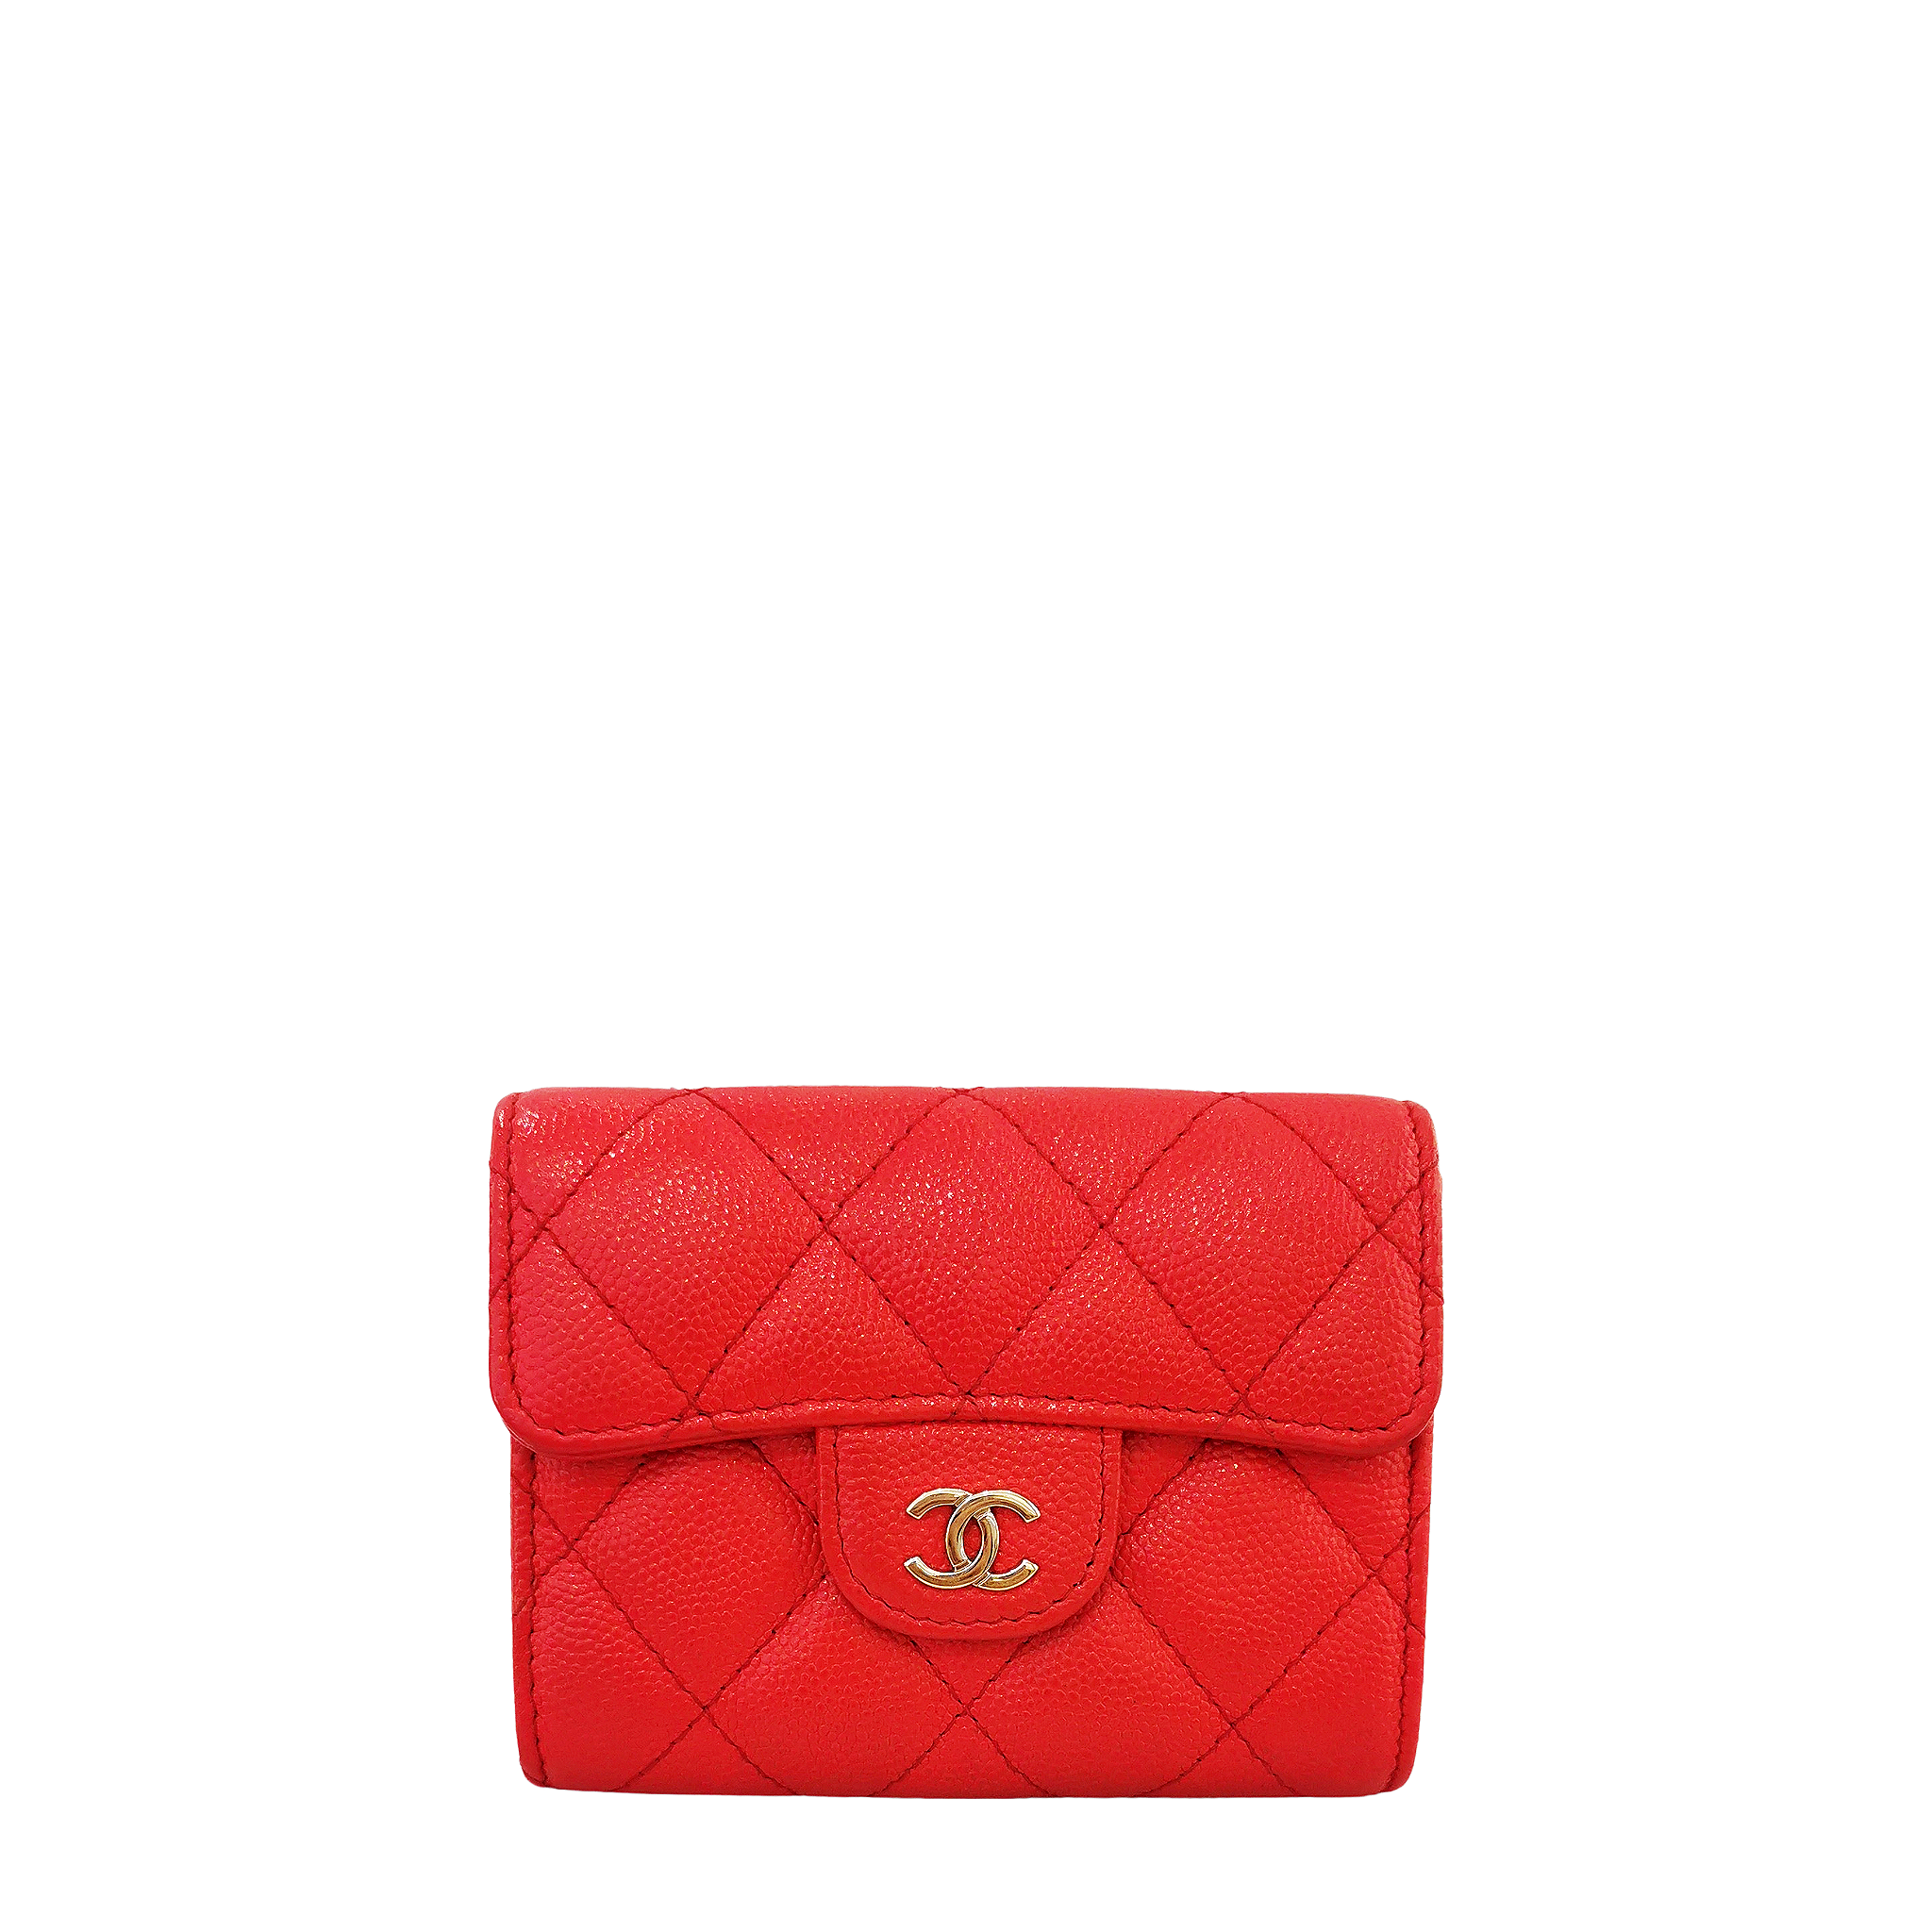 Chanel - Chanel Small Classic Flap Card Holder Wallet Caviar Red Season 27  Barangs Store